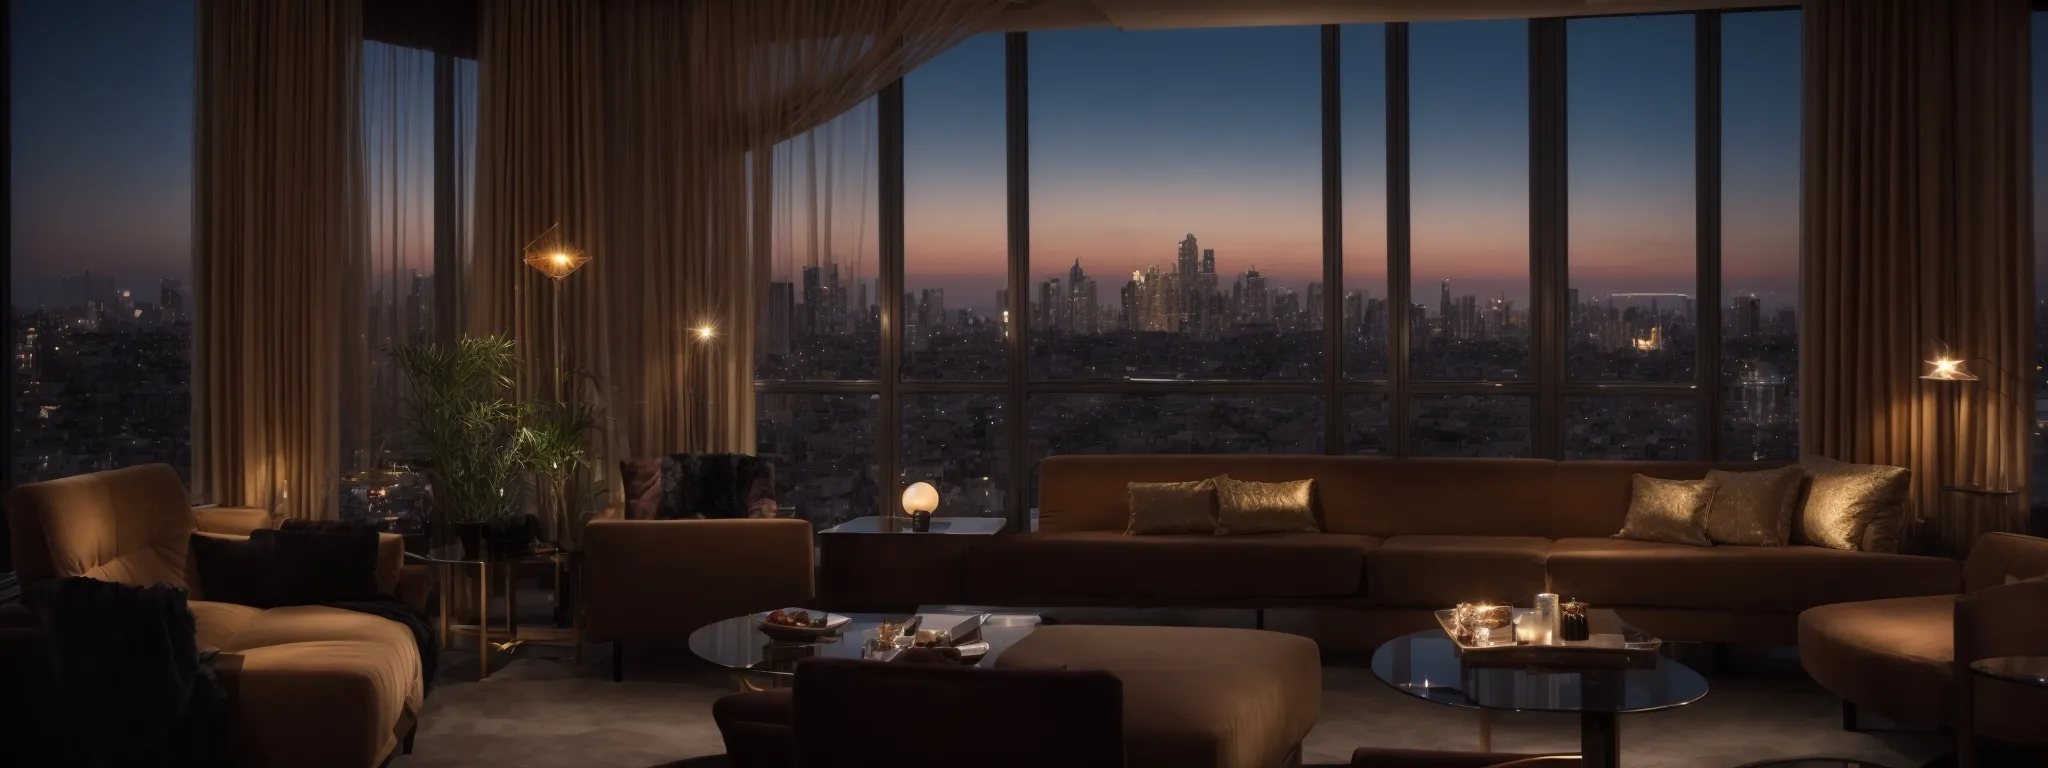 a luxurious hotel room with a view overlooking a bustling cityscape at dusk.